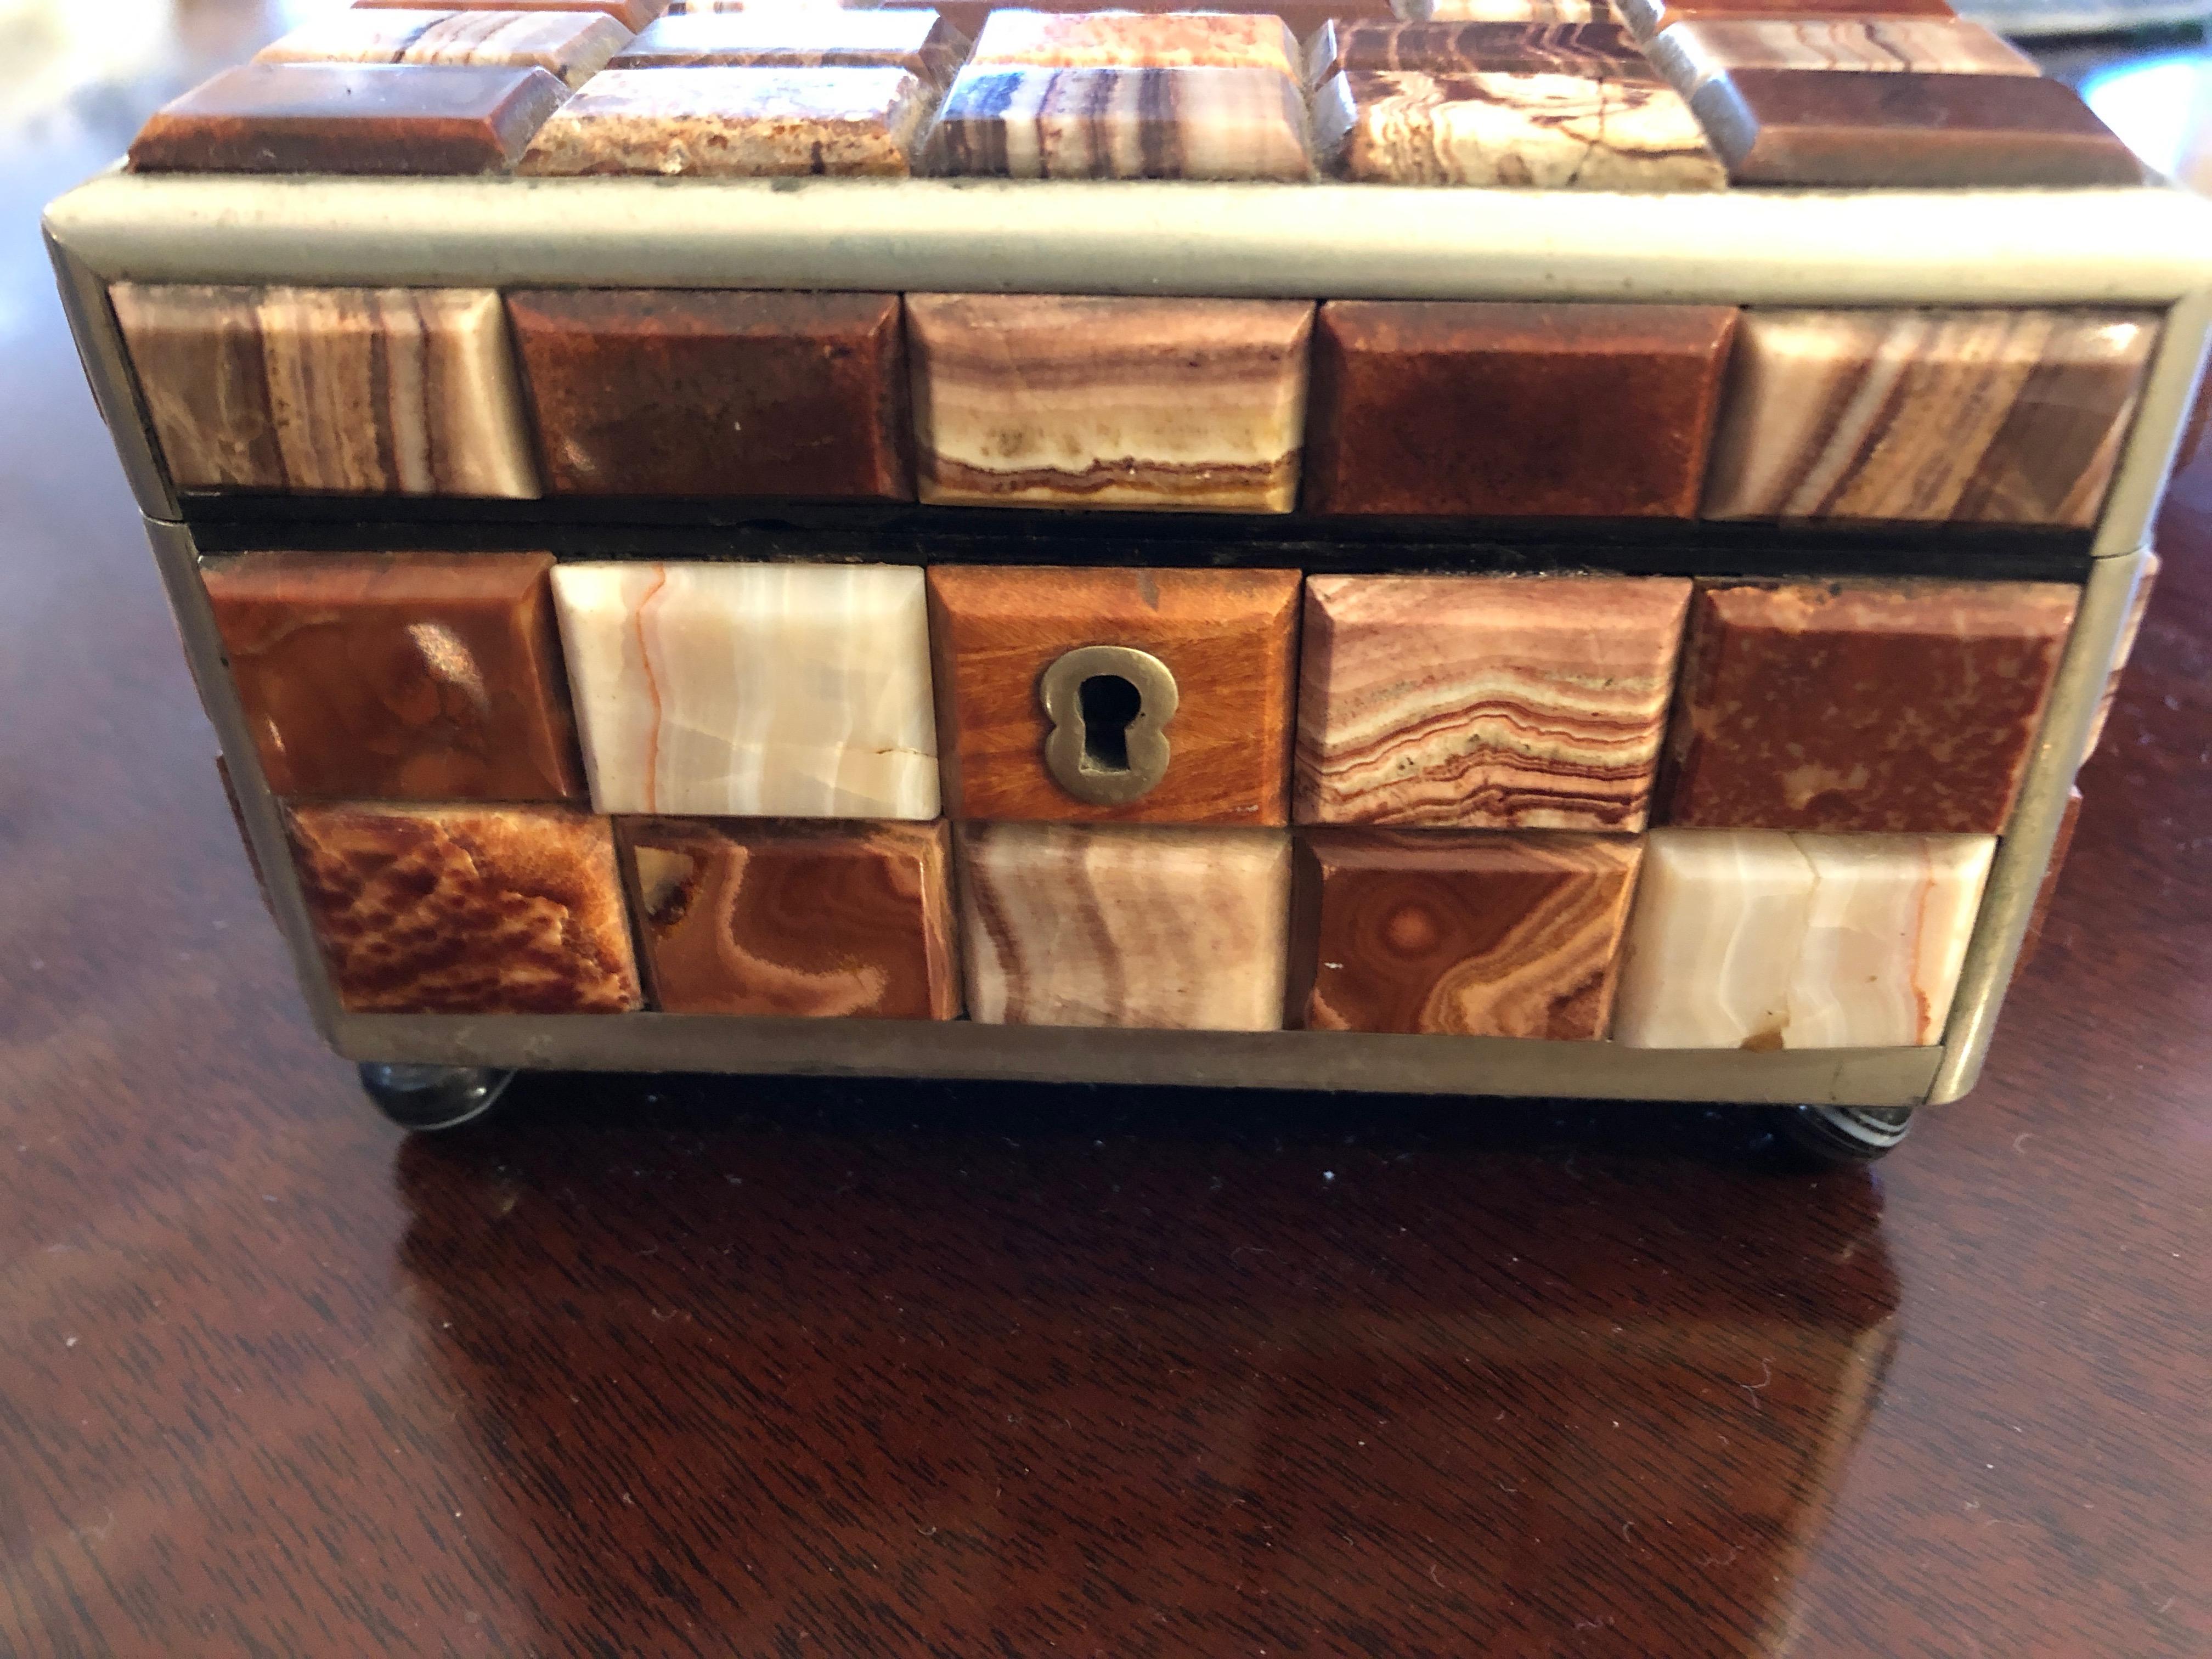 A gorgeous antique trinket box encrusted with small rectangles of earth colored agates & marble, including brown, orange, cream, and gold. There is silver metal edging and a silver keyhole, lined in wood inside.